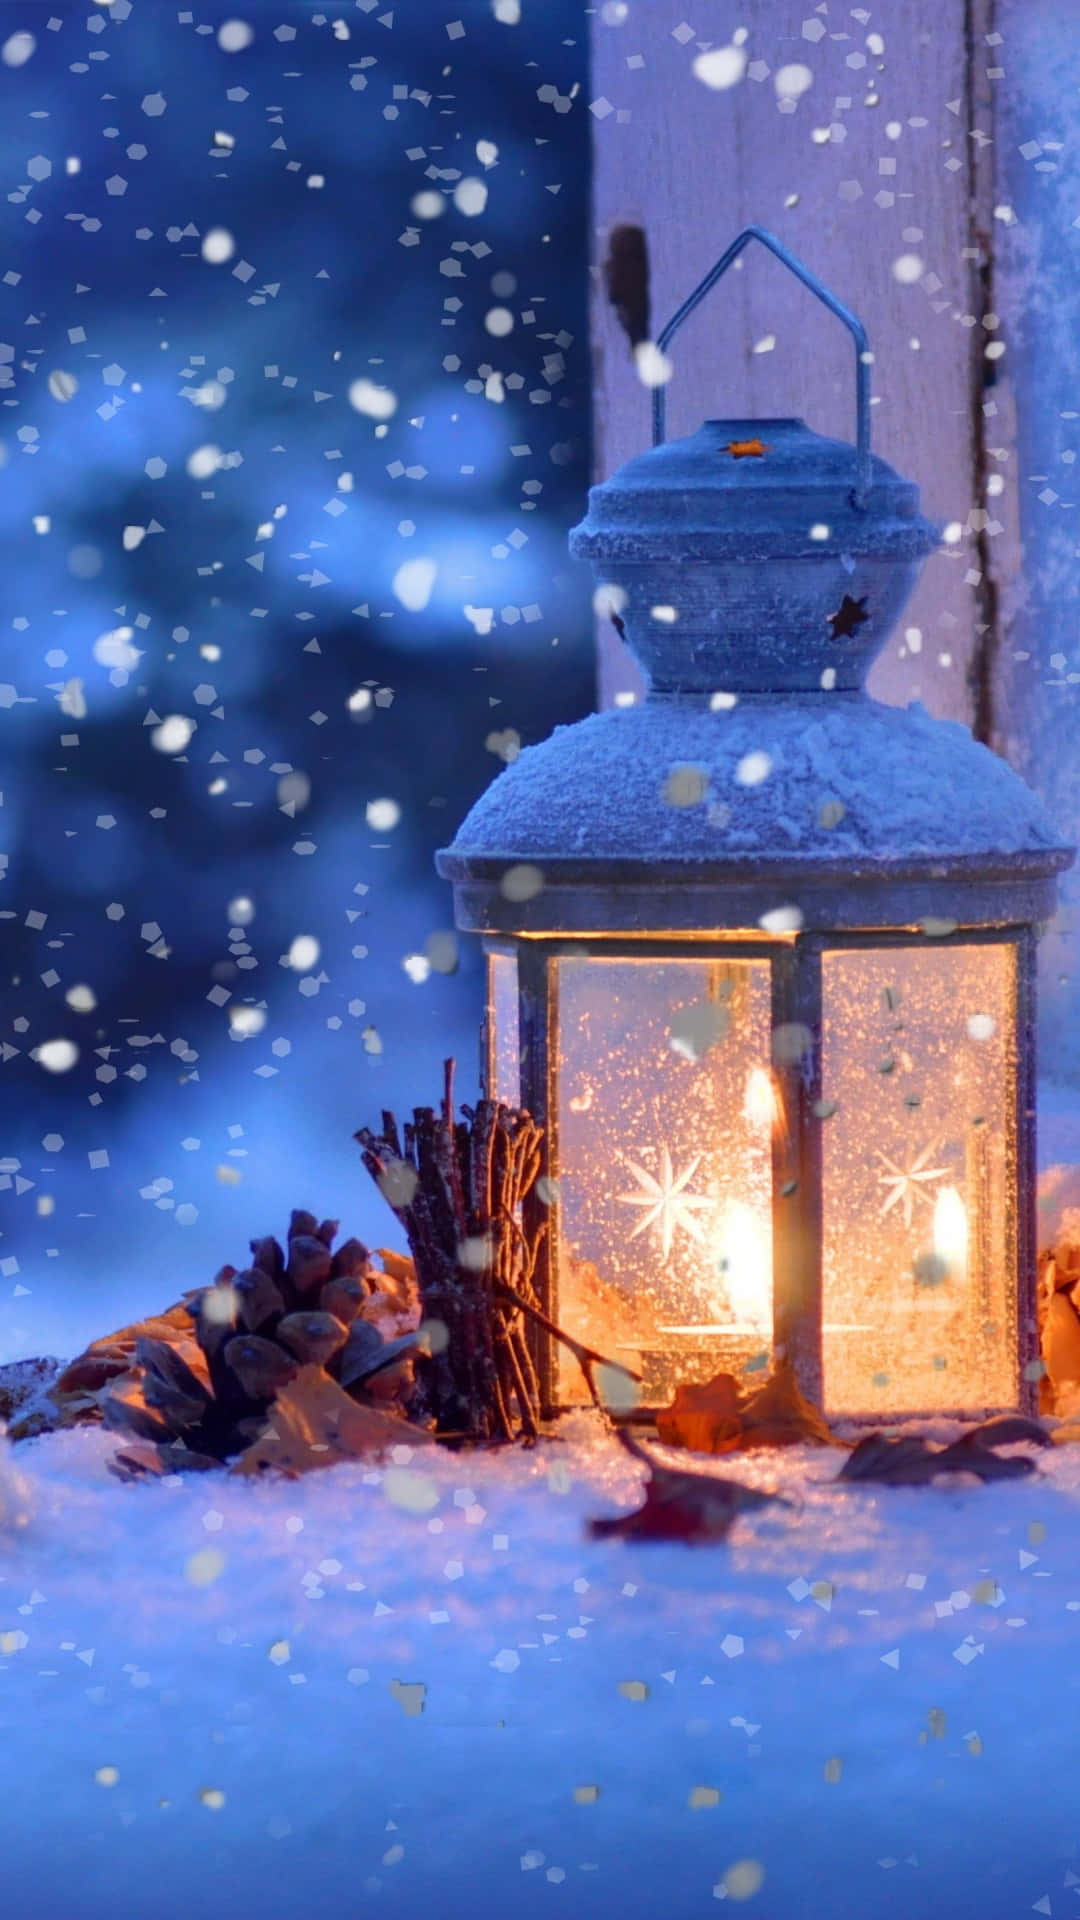 Lantern Lit With Snow Falling Background